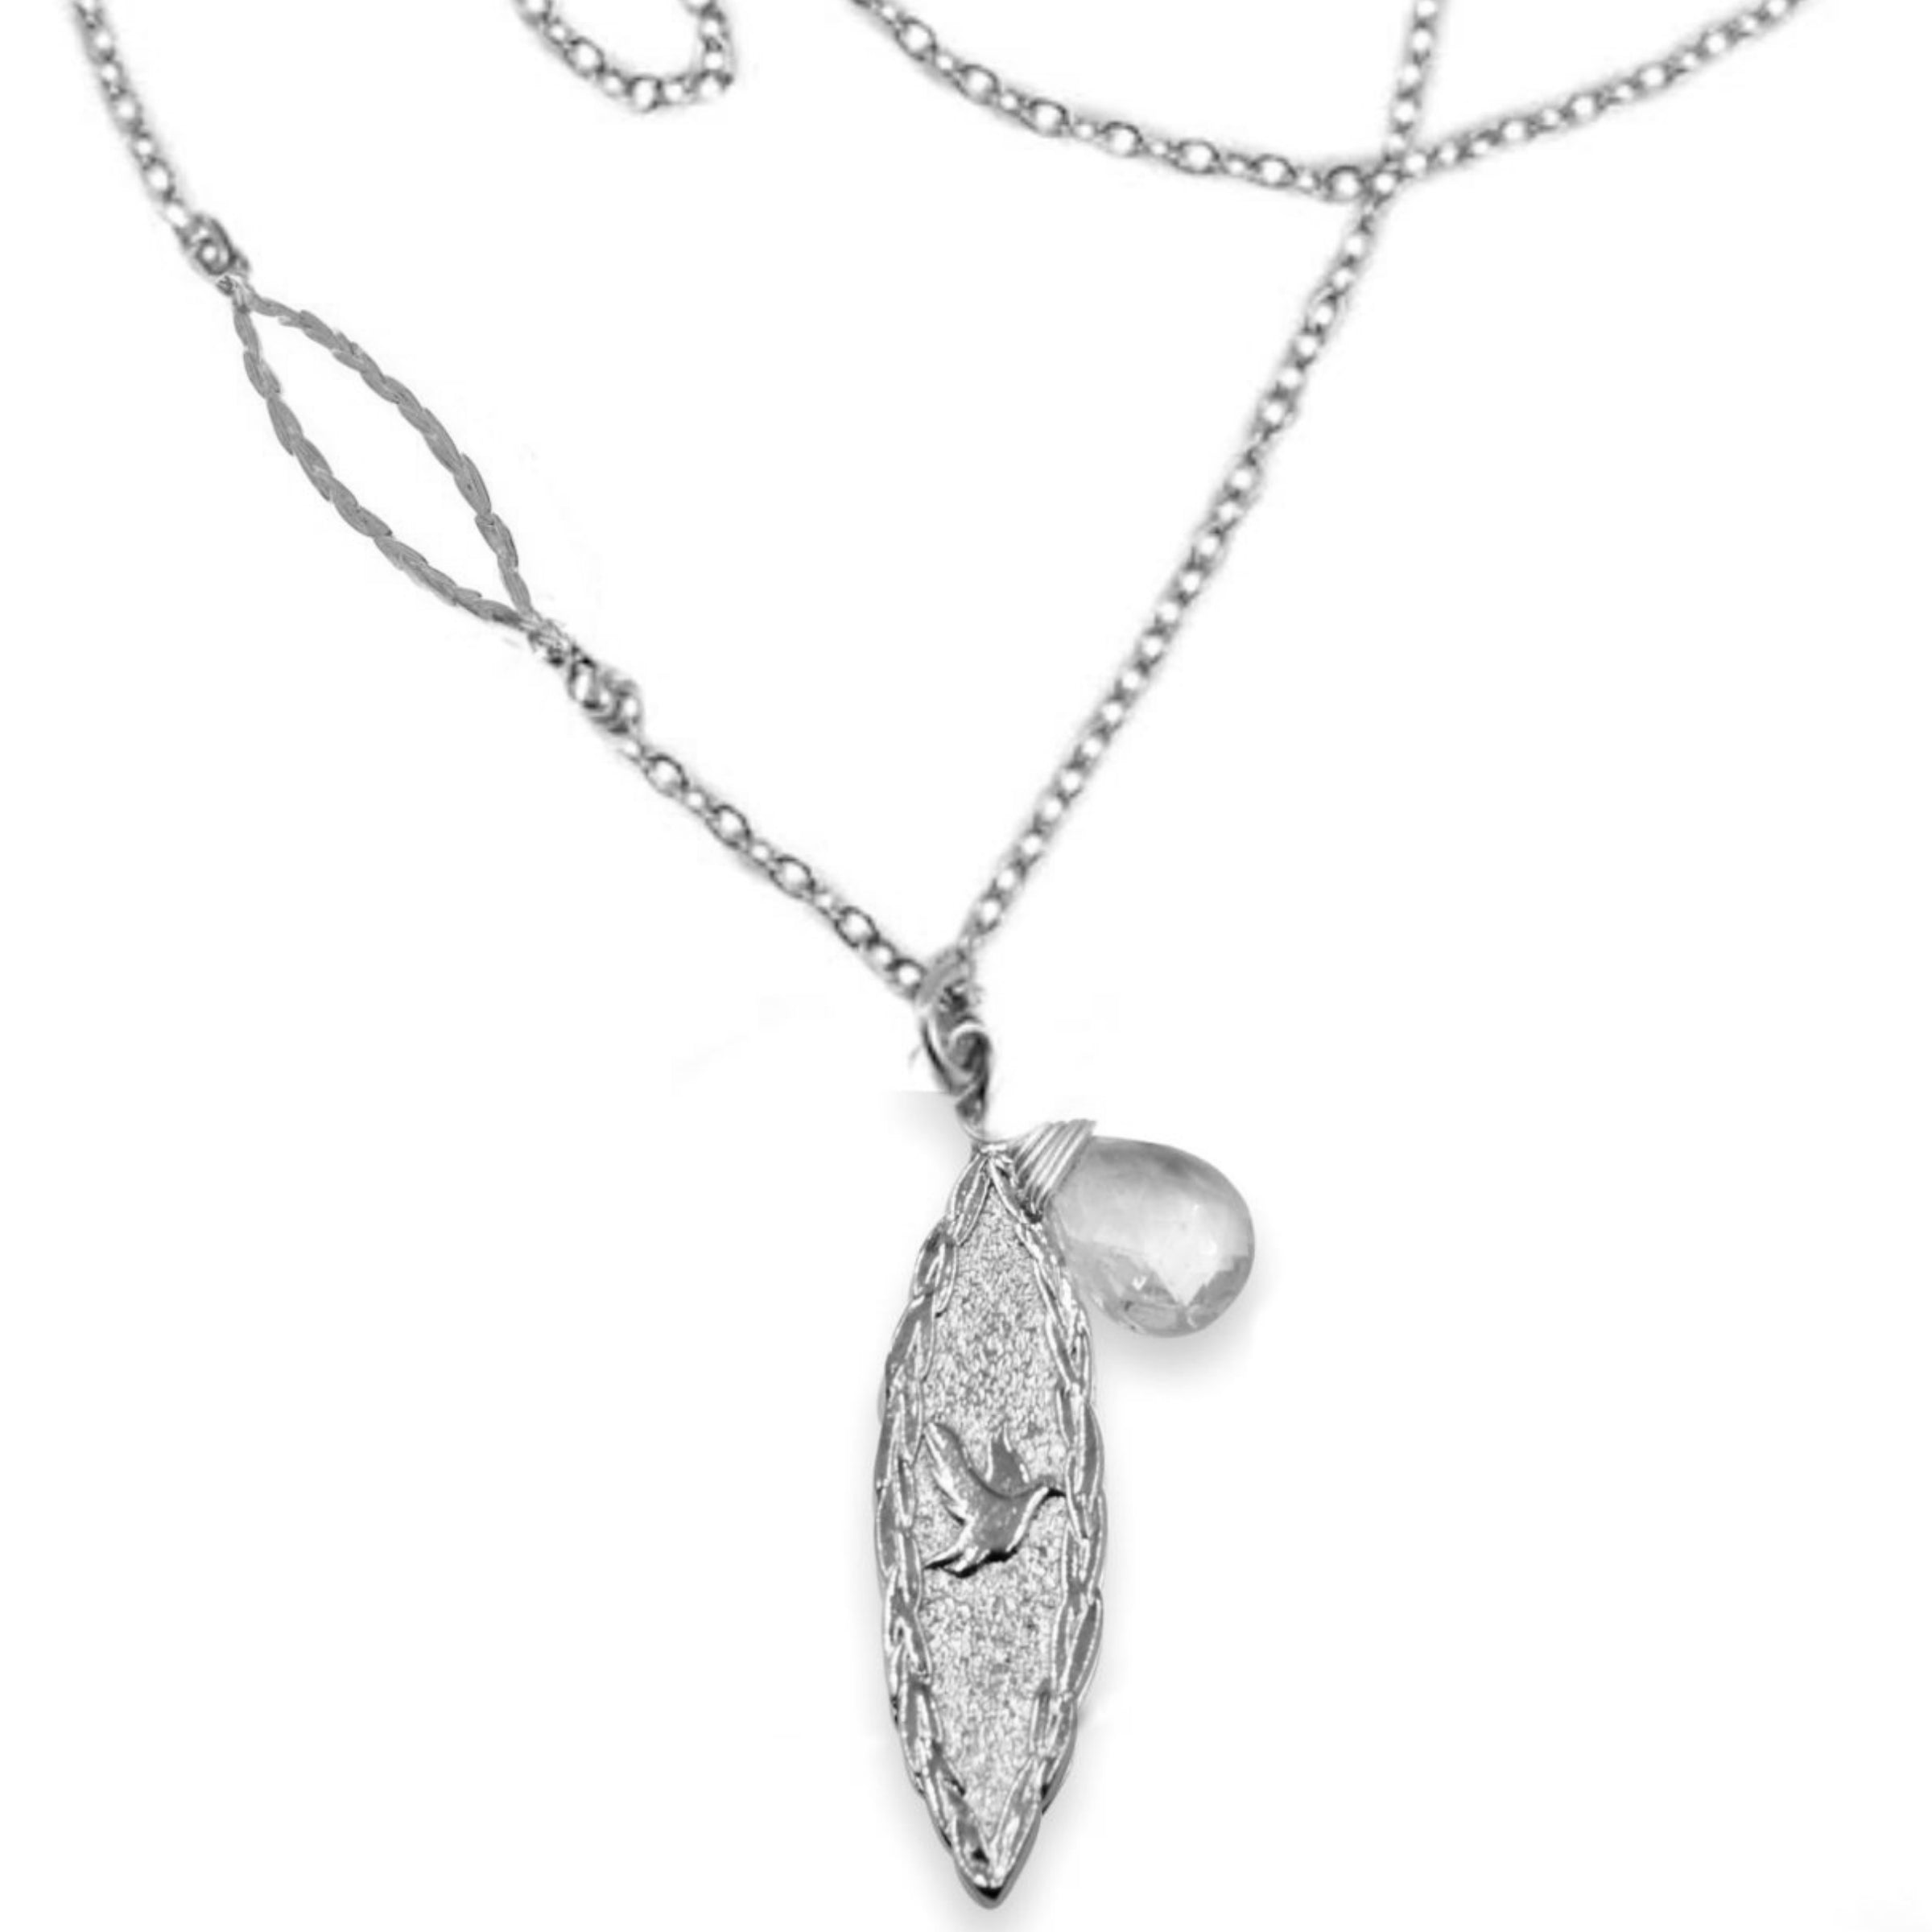 Amor Vincit Omnia Necklace with White Topaz, Gold or Silver, 18 or 36 inches long